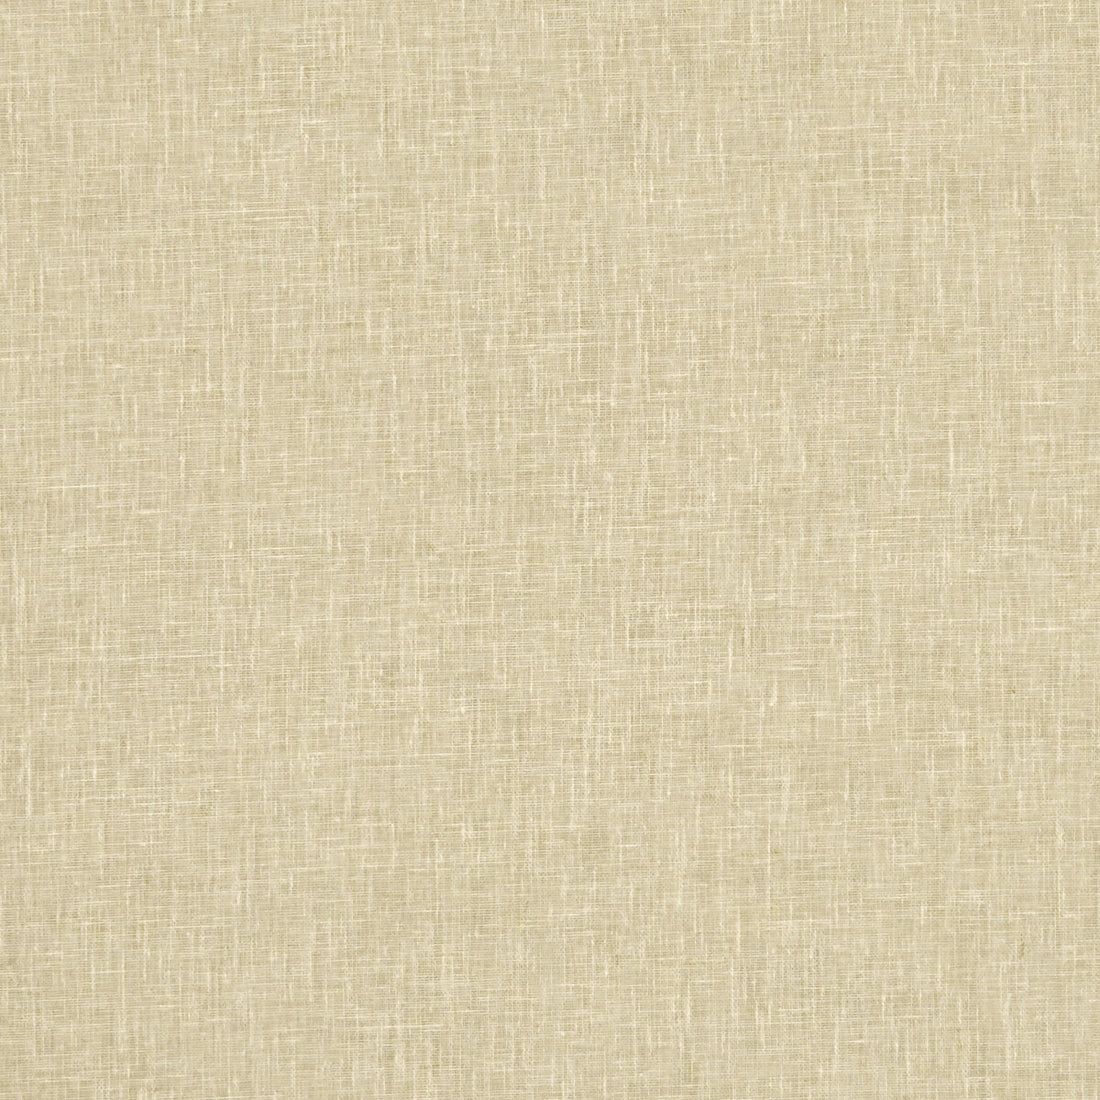 Midori fabric in sand color - pattern F1068/41.CAC.0 - by Clarke And Clarke in the Clarke &amp; Clarke Midori collection